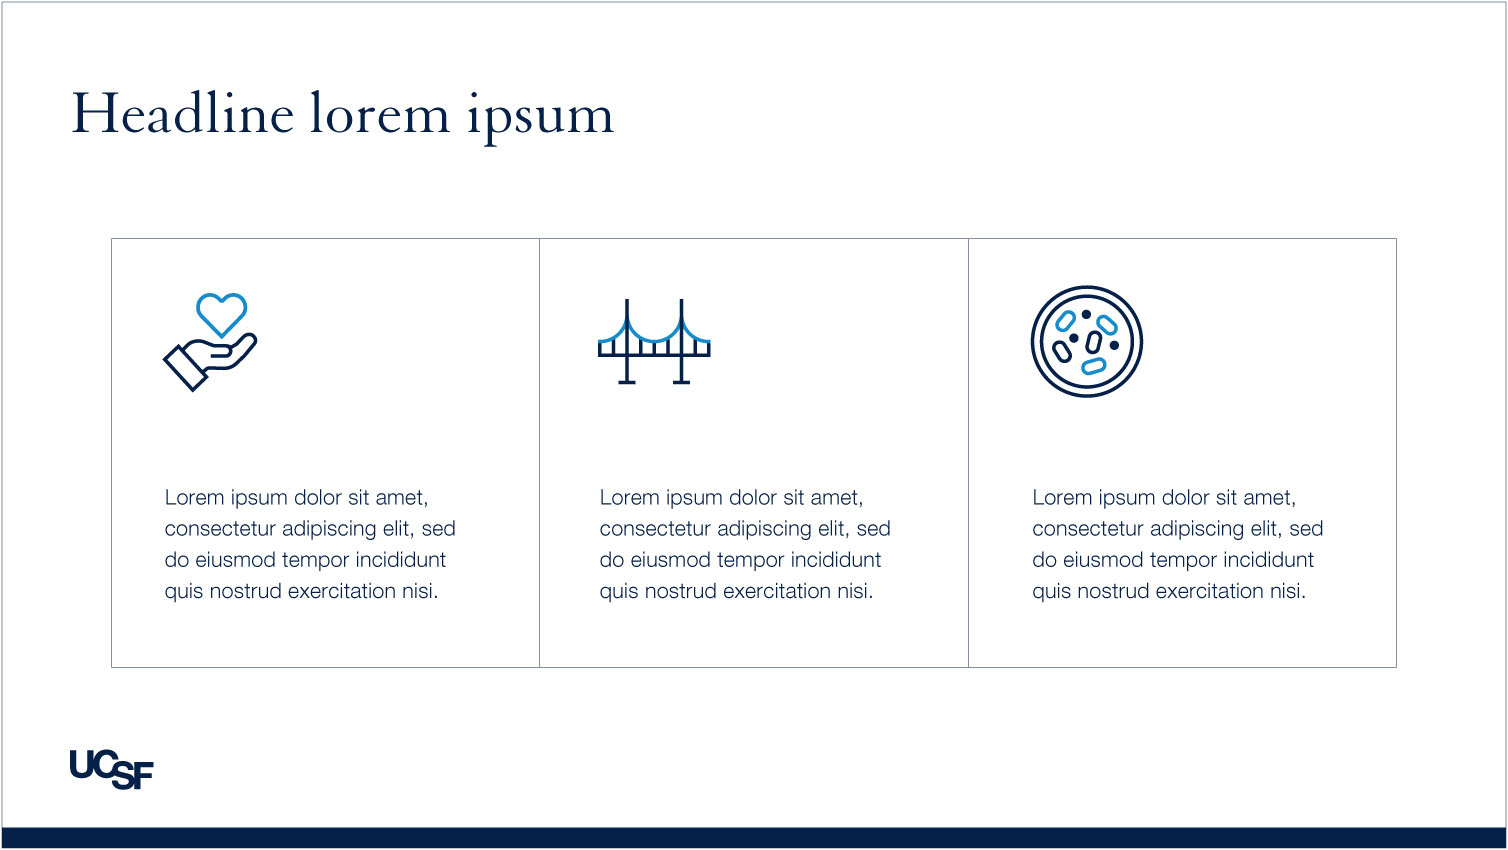 Sample website using iconography with scientific and medical symbols in navy, blue and white on a white background